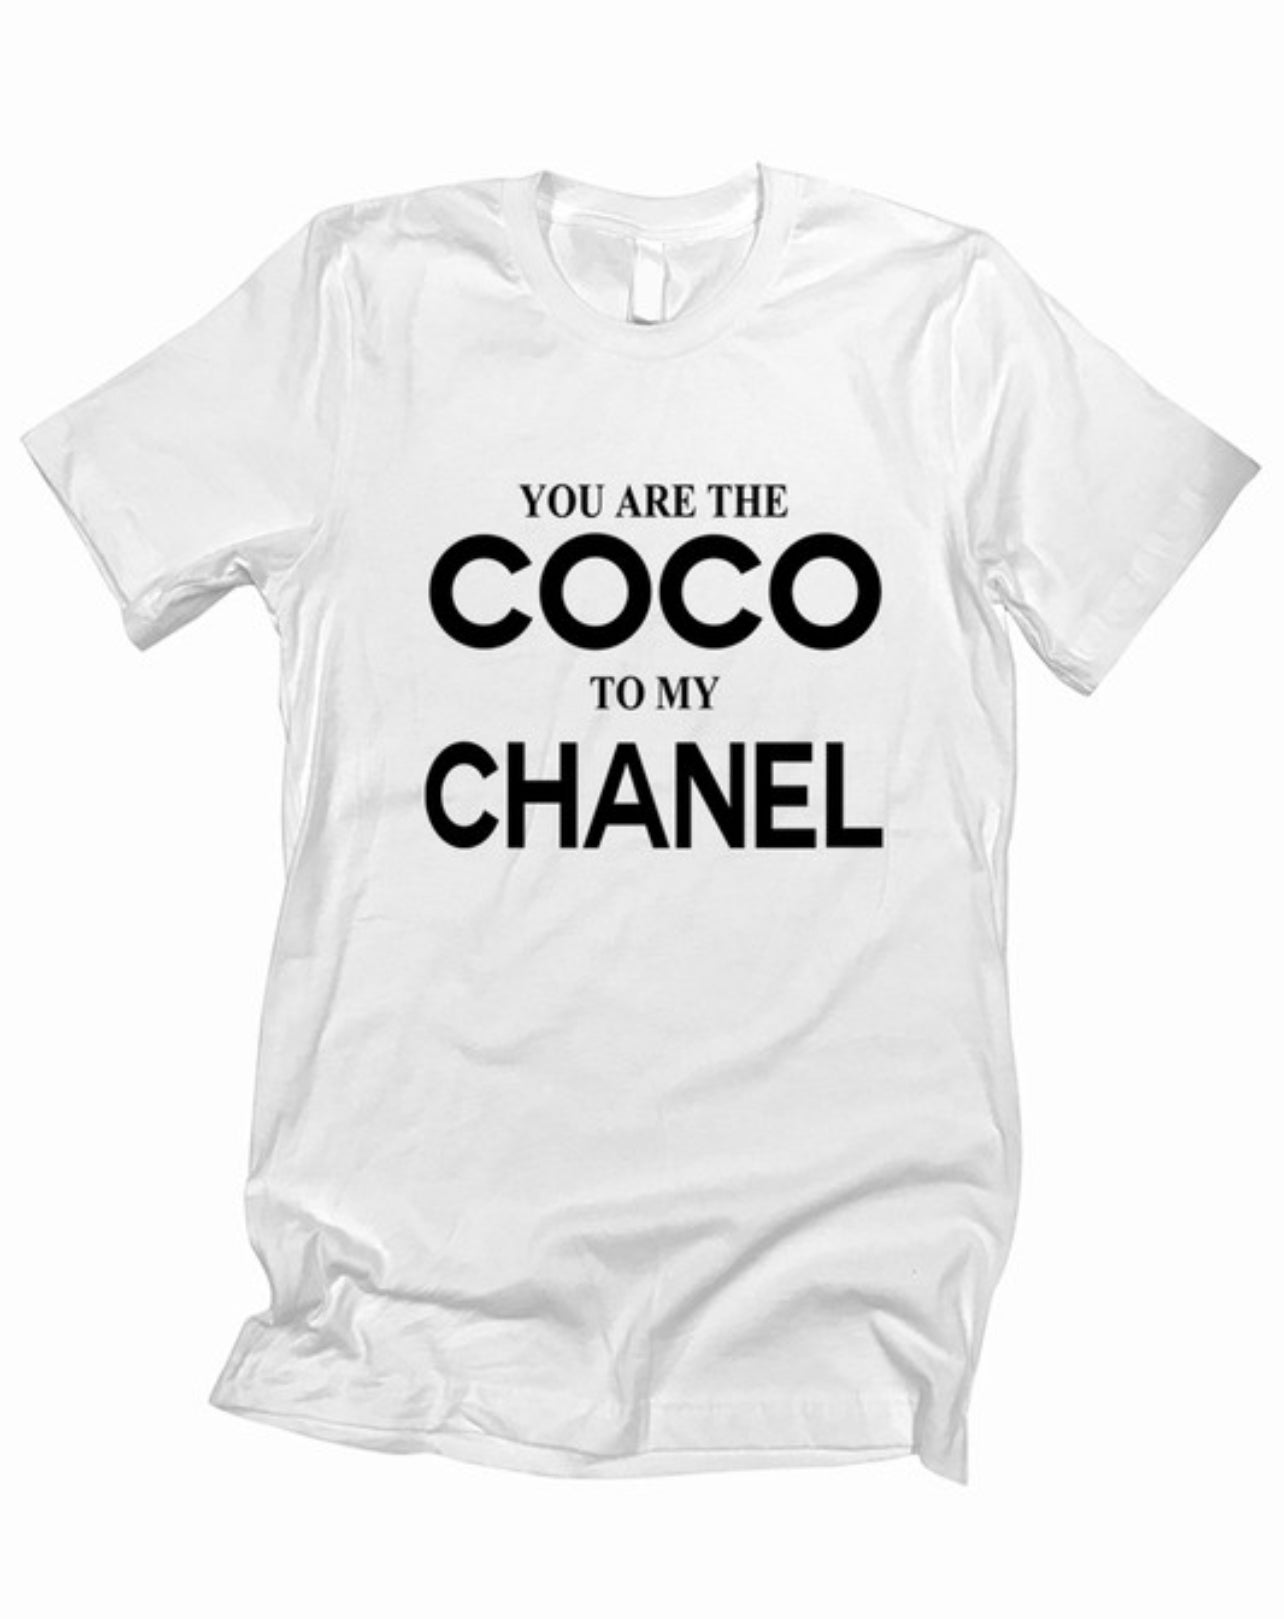 You Are The Coco to My Chanel Women's Top